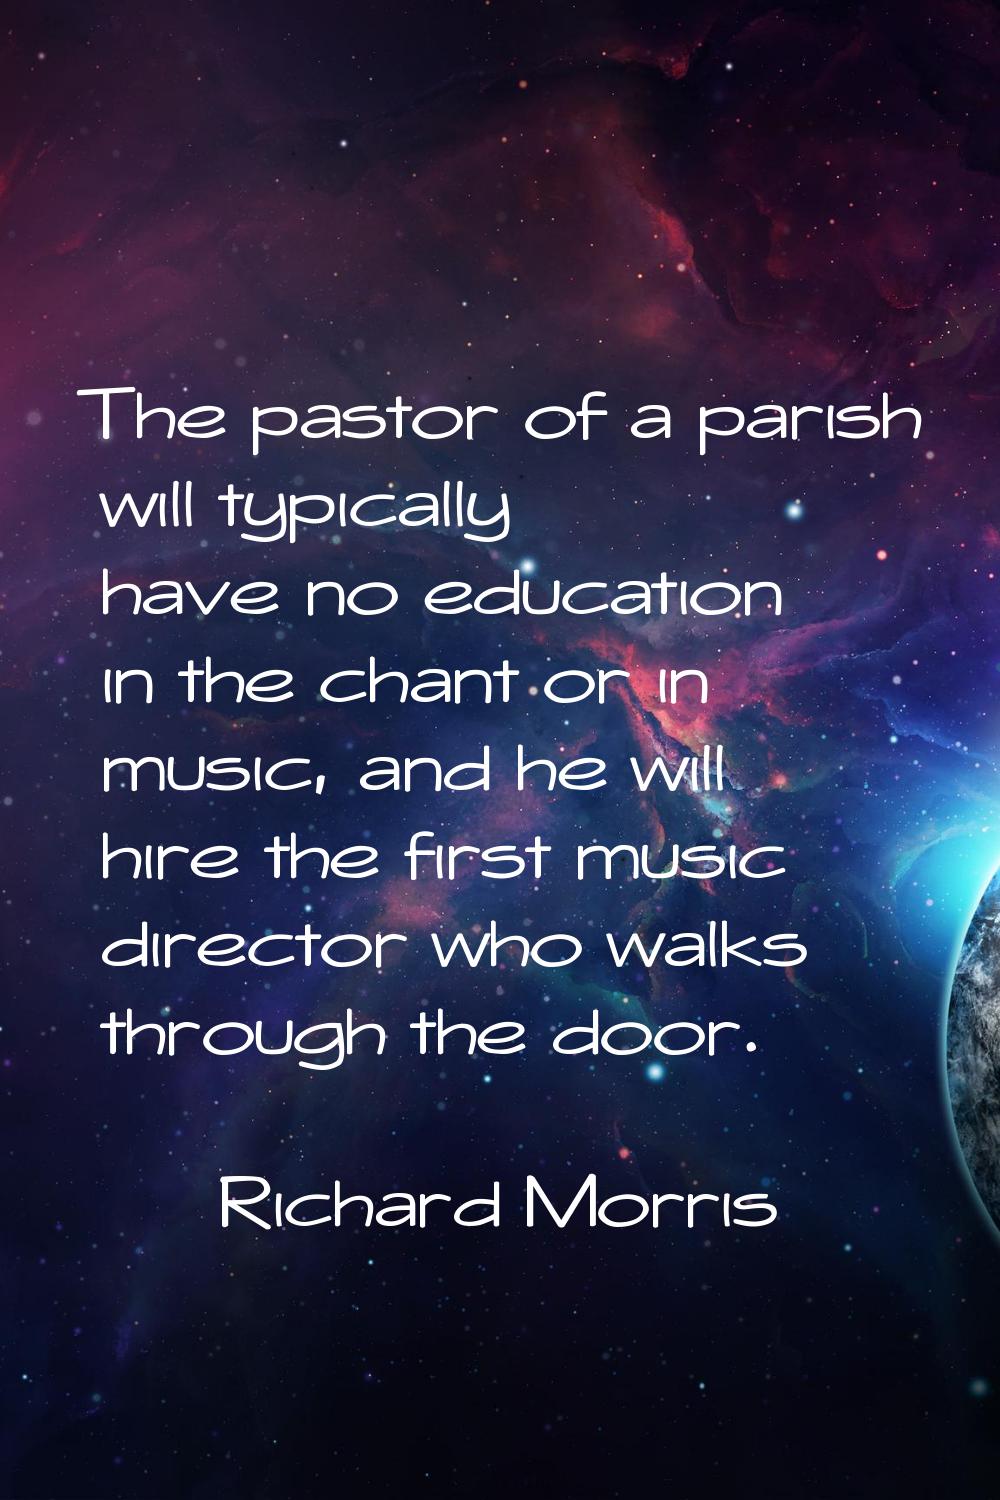 The pastor of a parish will typically have no education in the chant or in music, and he will hire 